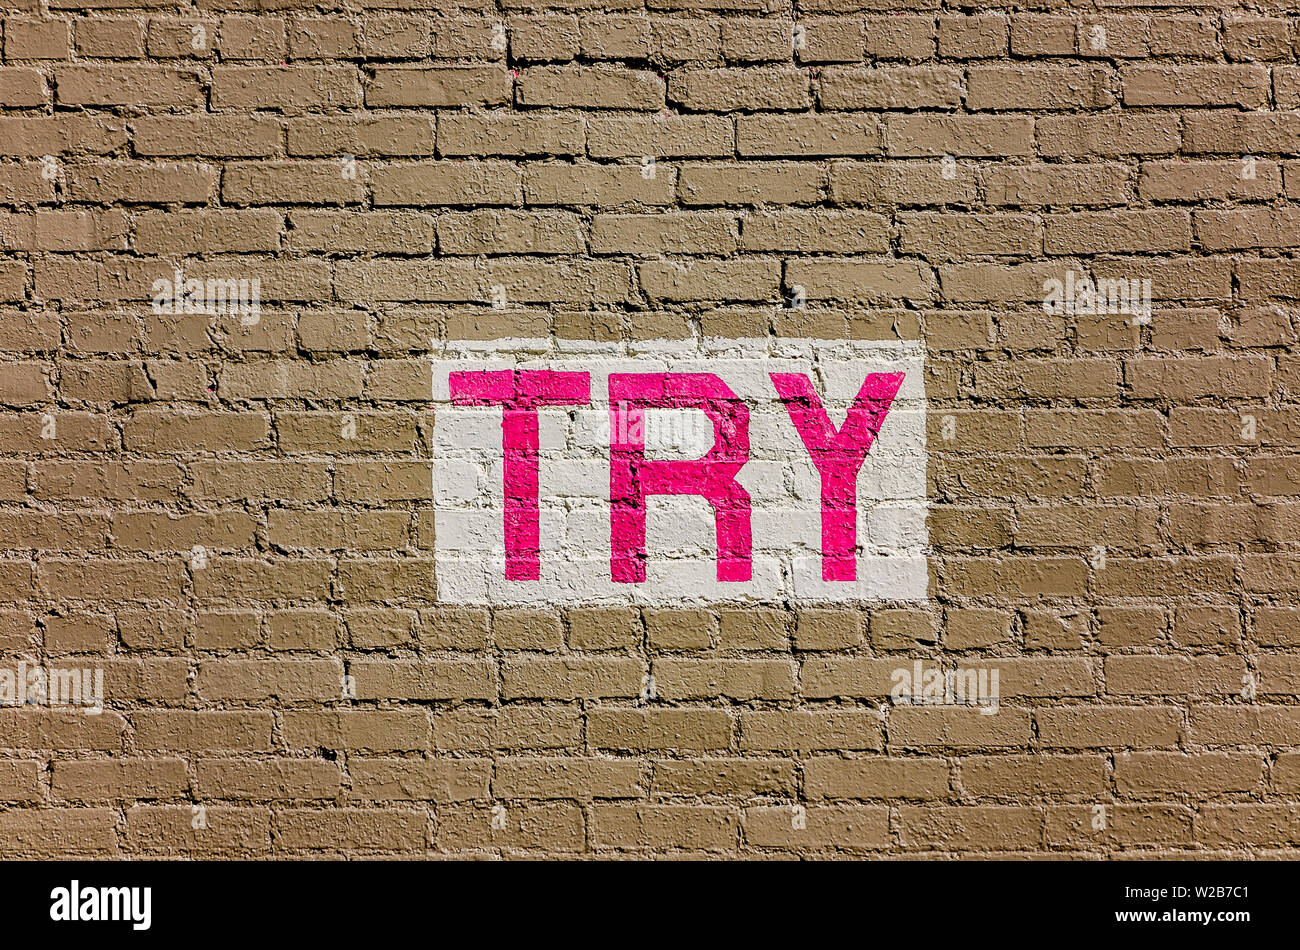 The word “try” is painted on a brick wall, Sept. 12, 2015, in Memphis, Tennessee. Stock Photo